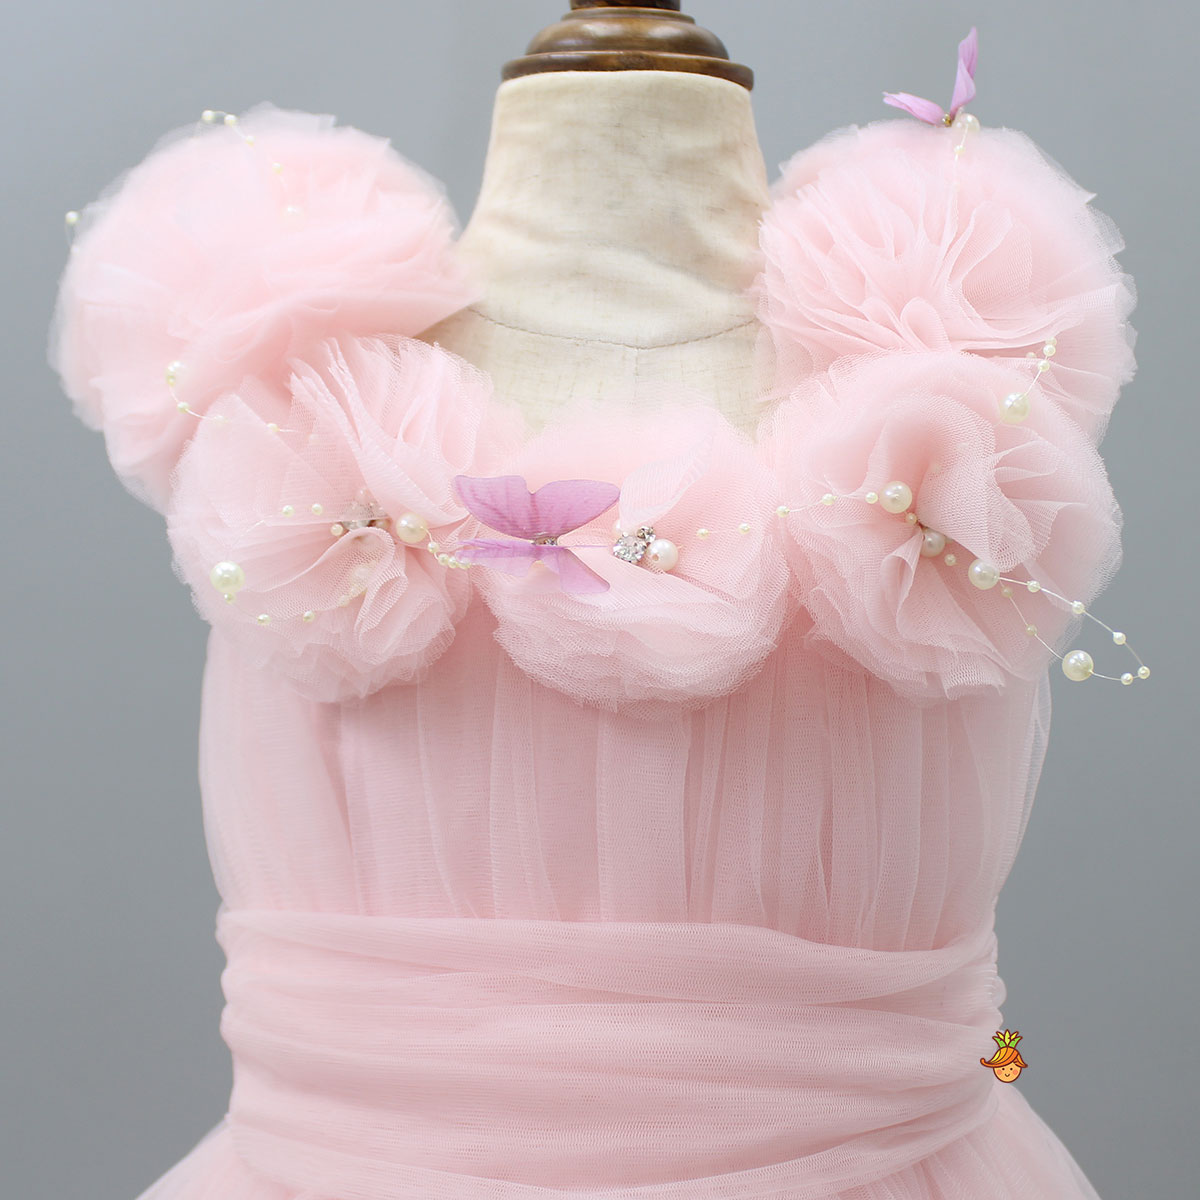 Pre Order: Pearls And Butterfly Embellished Ruffled Frilly High Low Dress